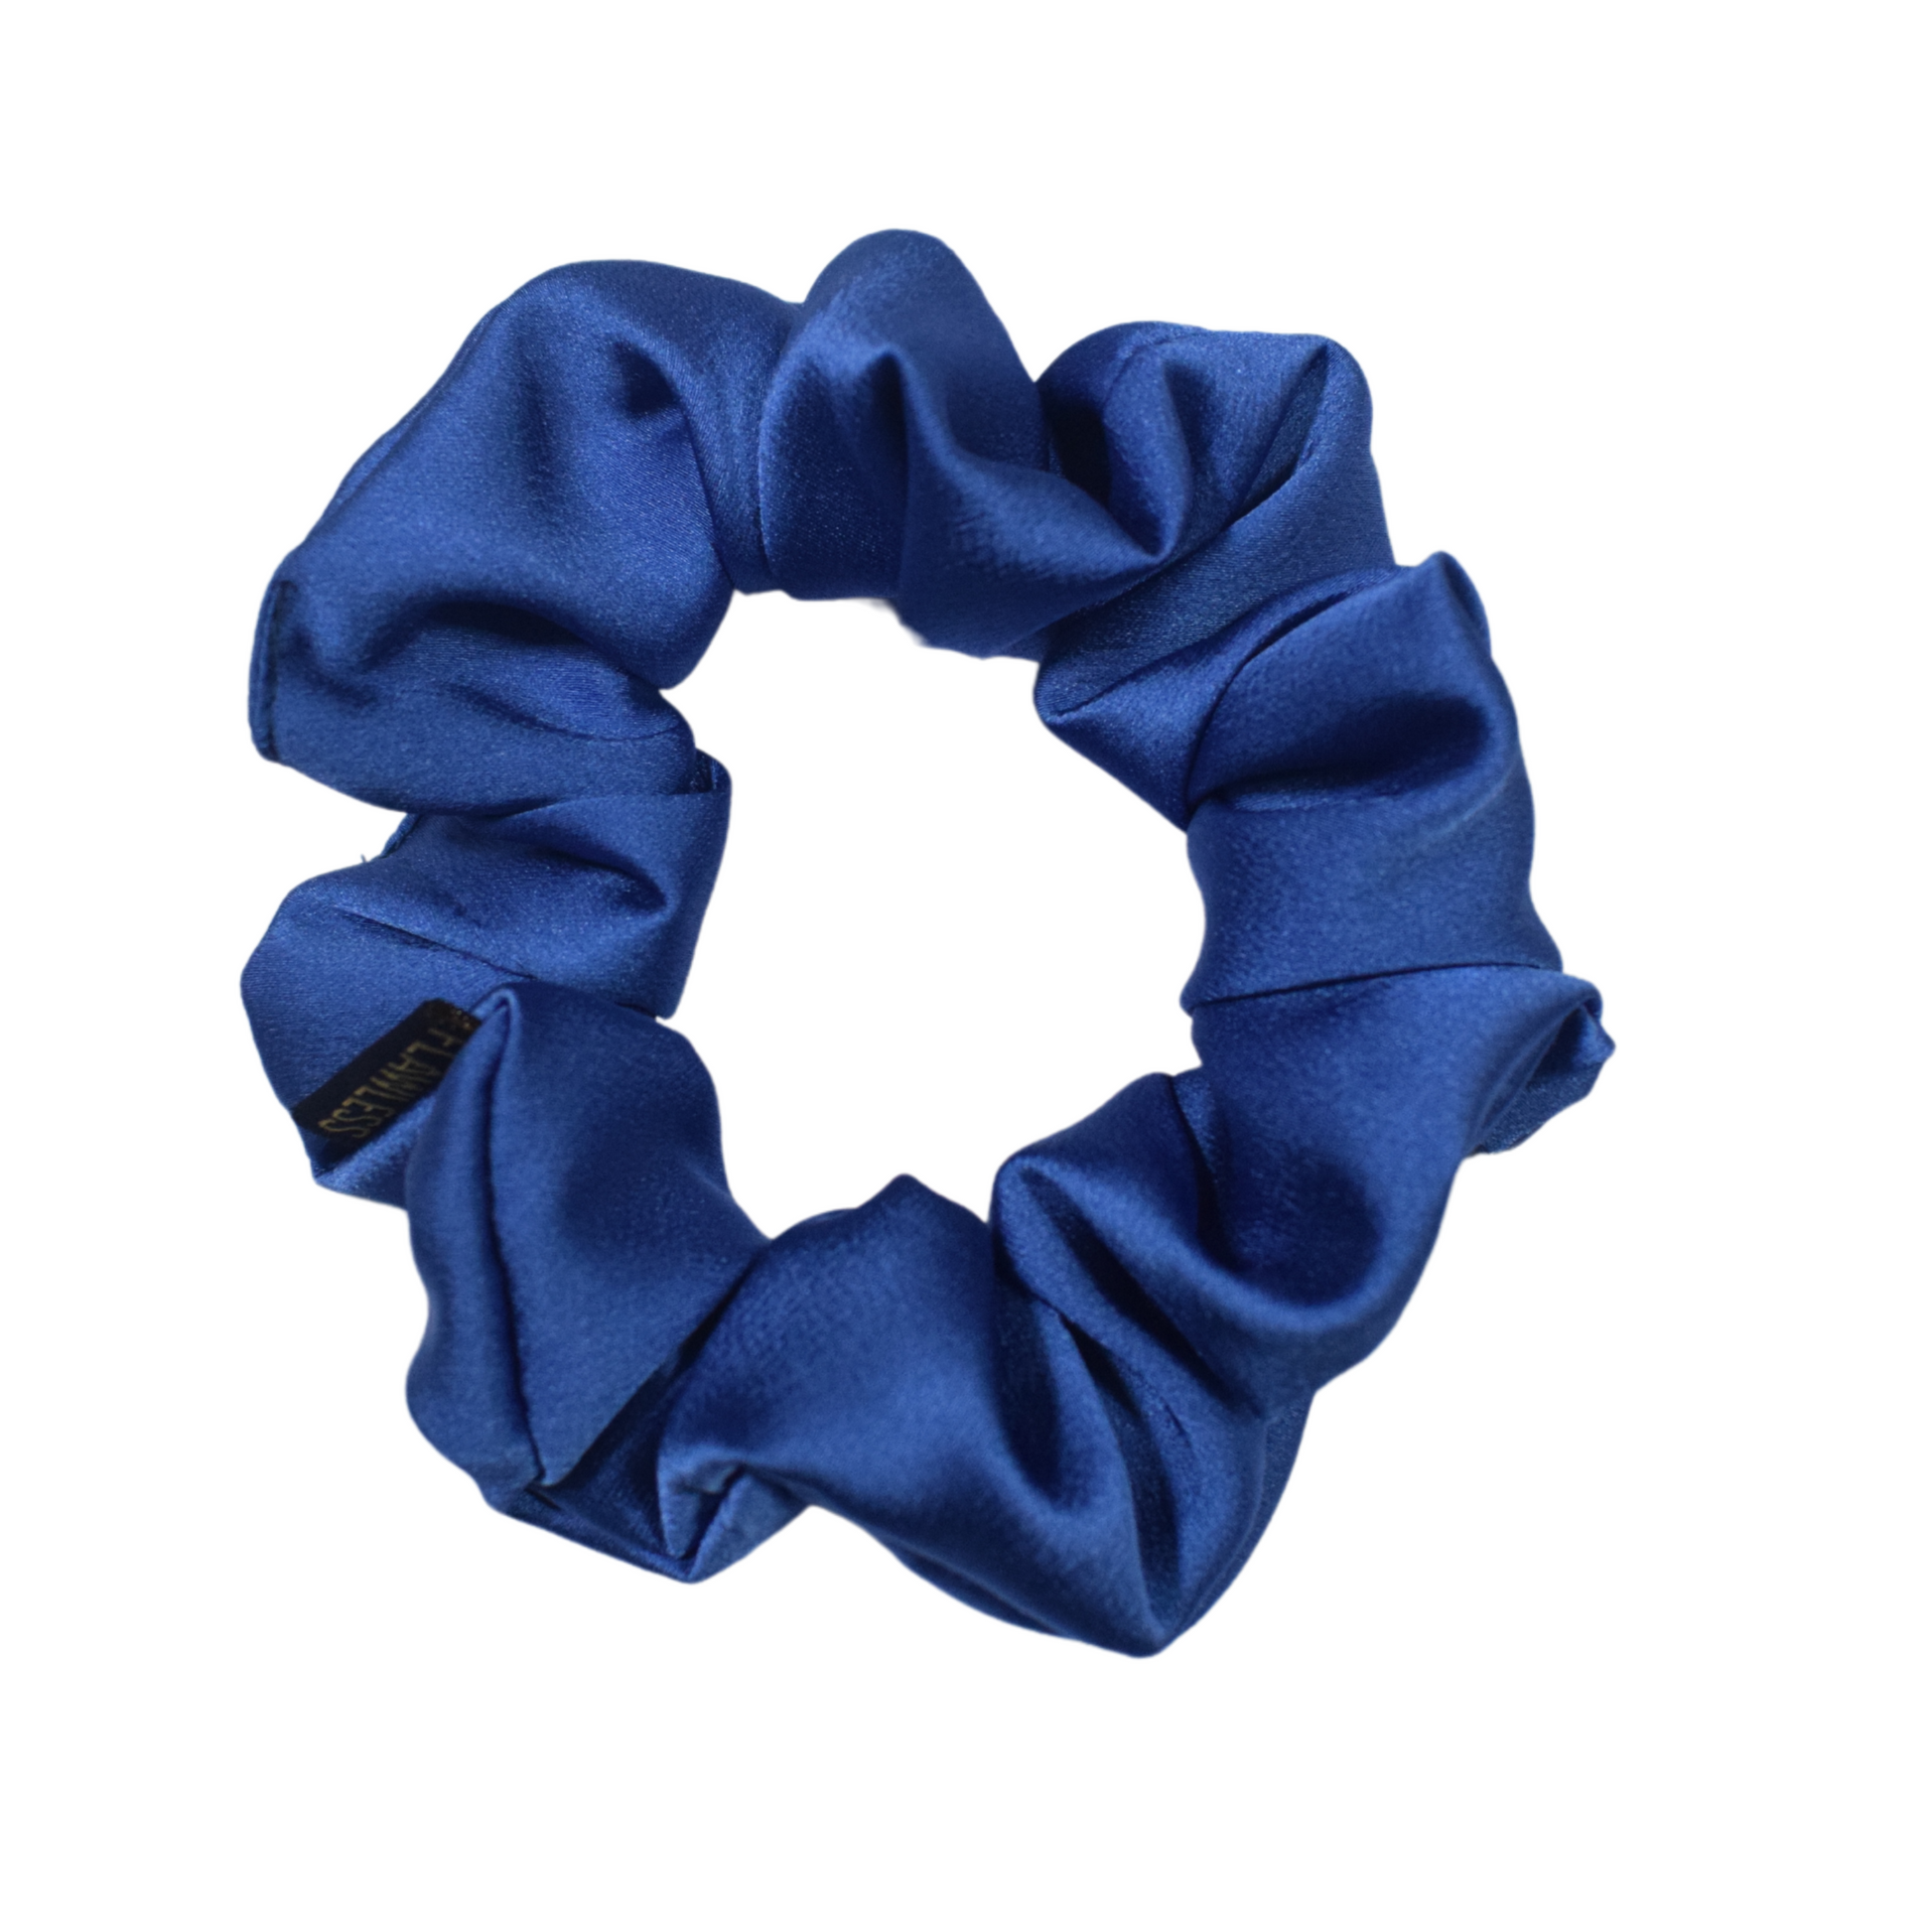 Flawless Blue Satin scrunchies set for women Girls Being Flawless